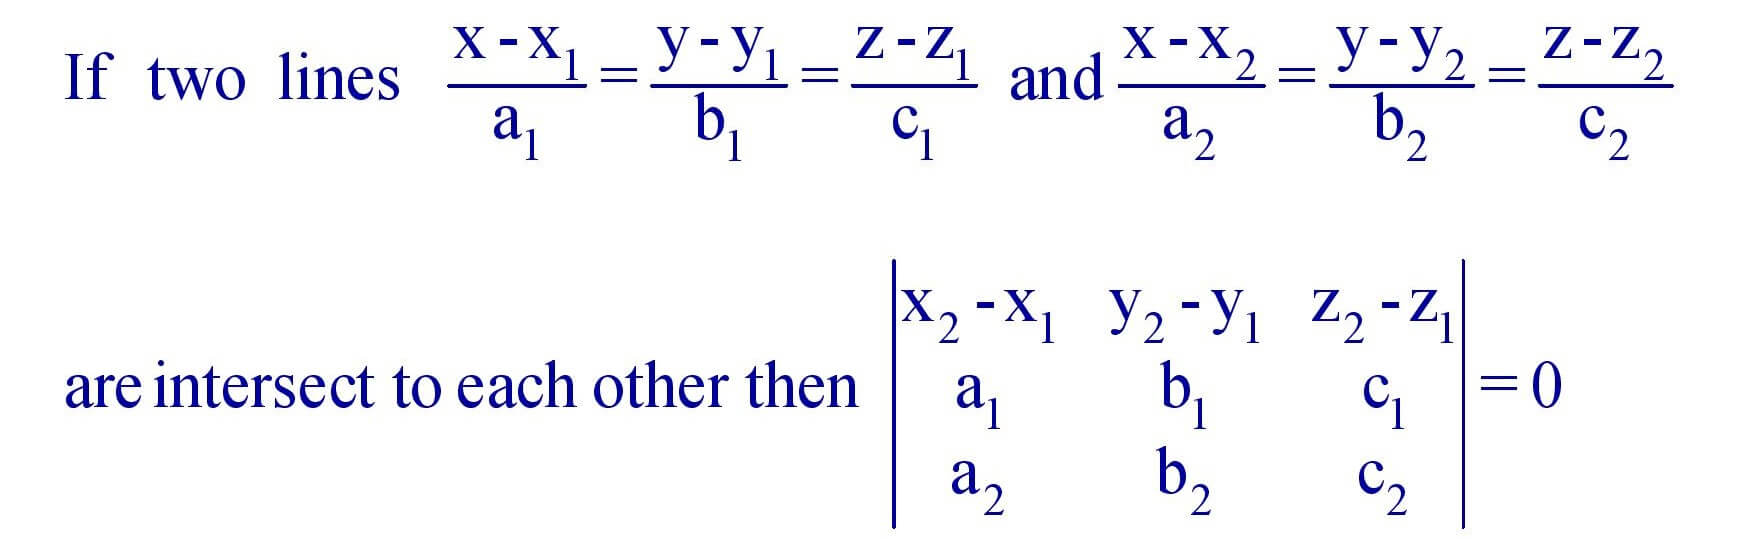 Condition for lines to intersect for cartesian form